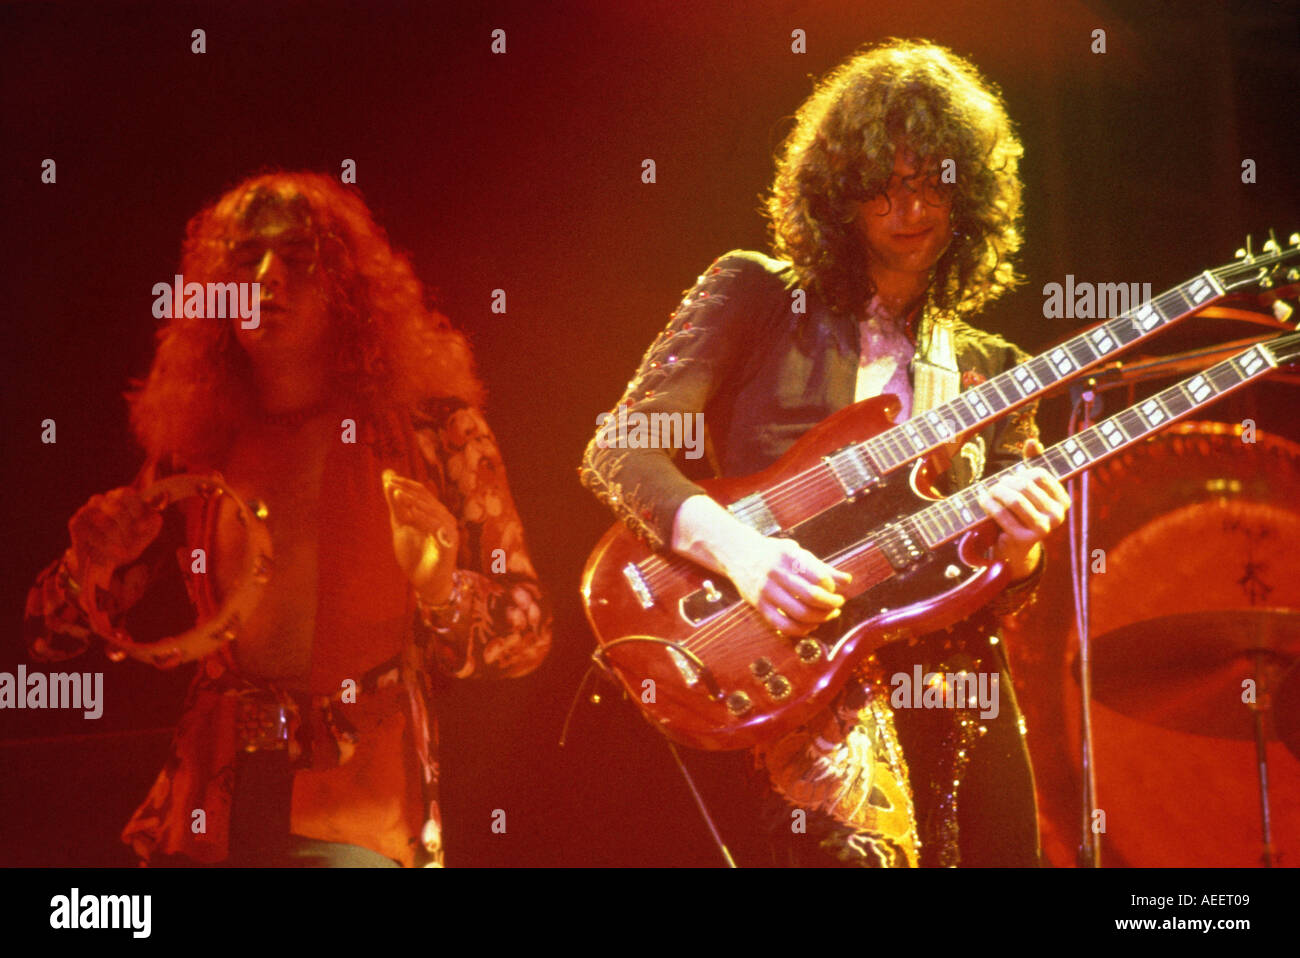 LED ZEPPELIN Robert Plant and Jimmy Page on guitar in 1975 Stock Photo